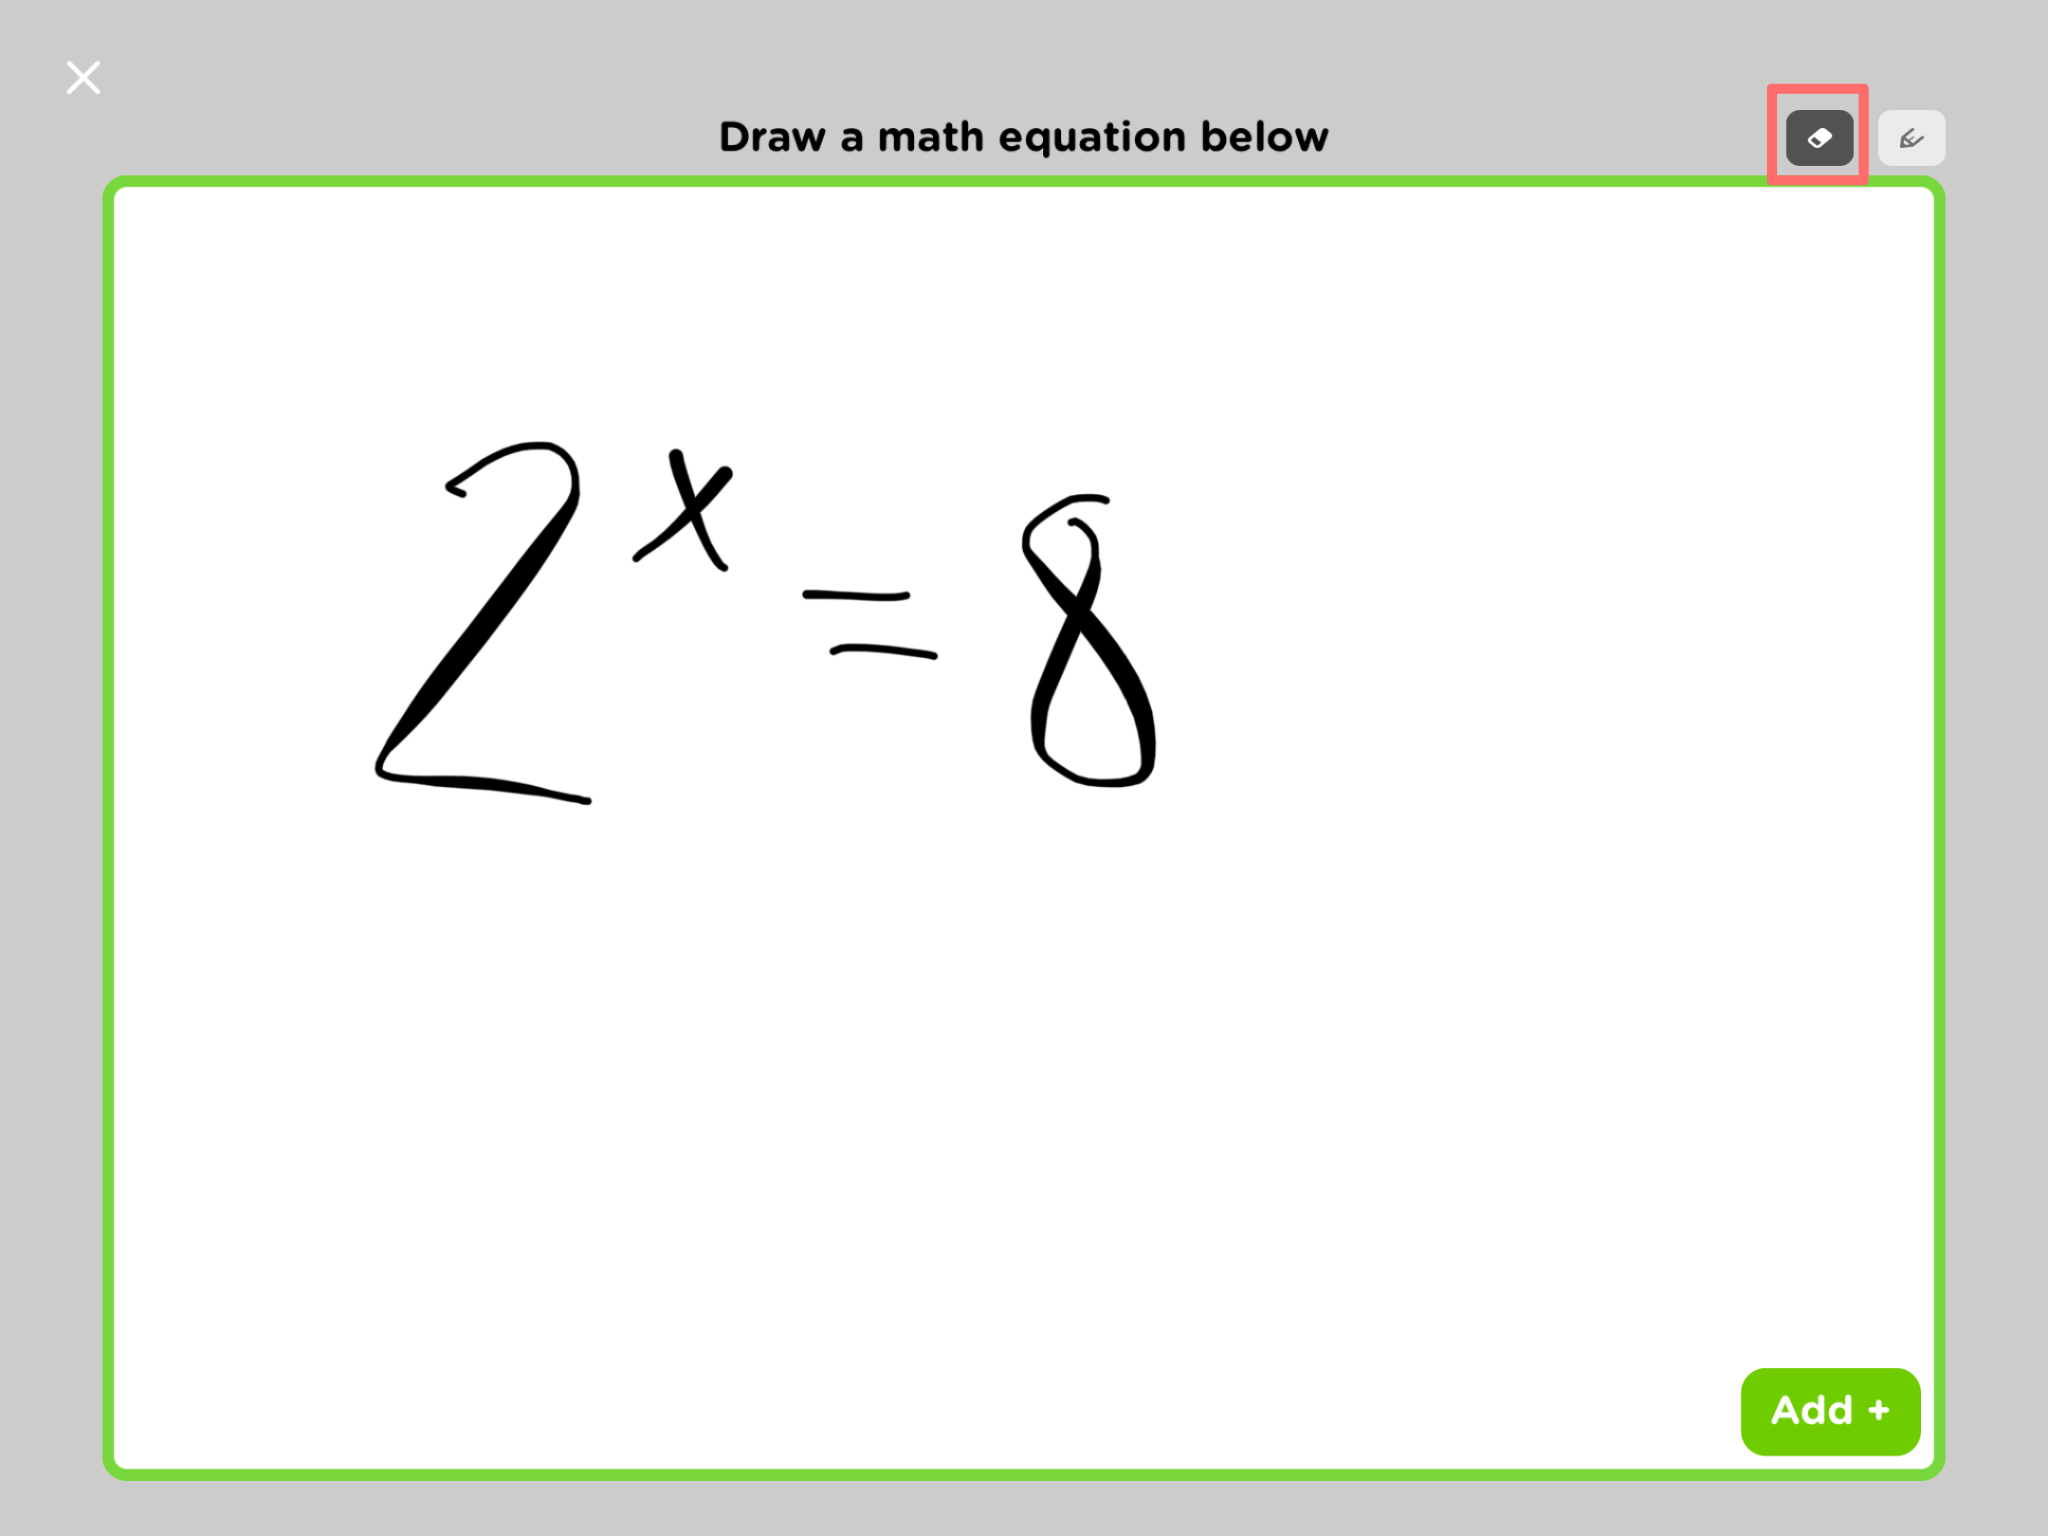 The Math Equation window is shown again. The eraser icon is highlighted in the top-right corner. The equation now shows as 2 to the x power equals 8.